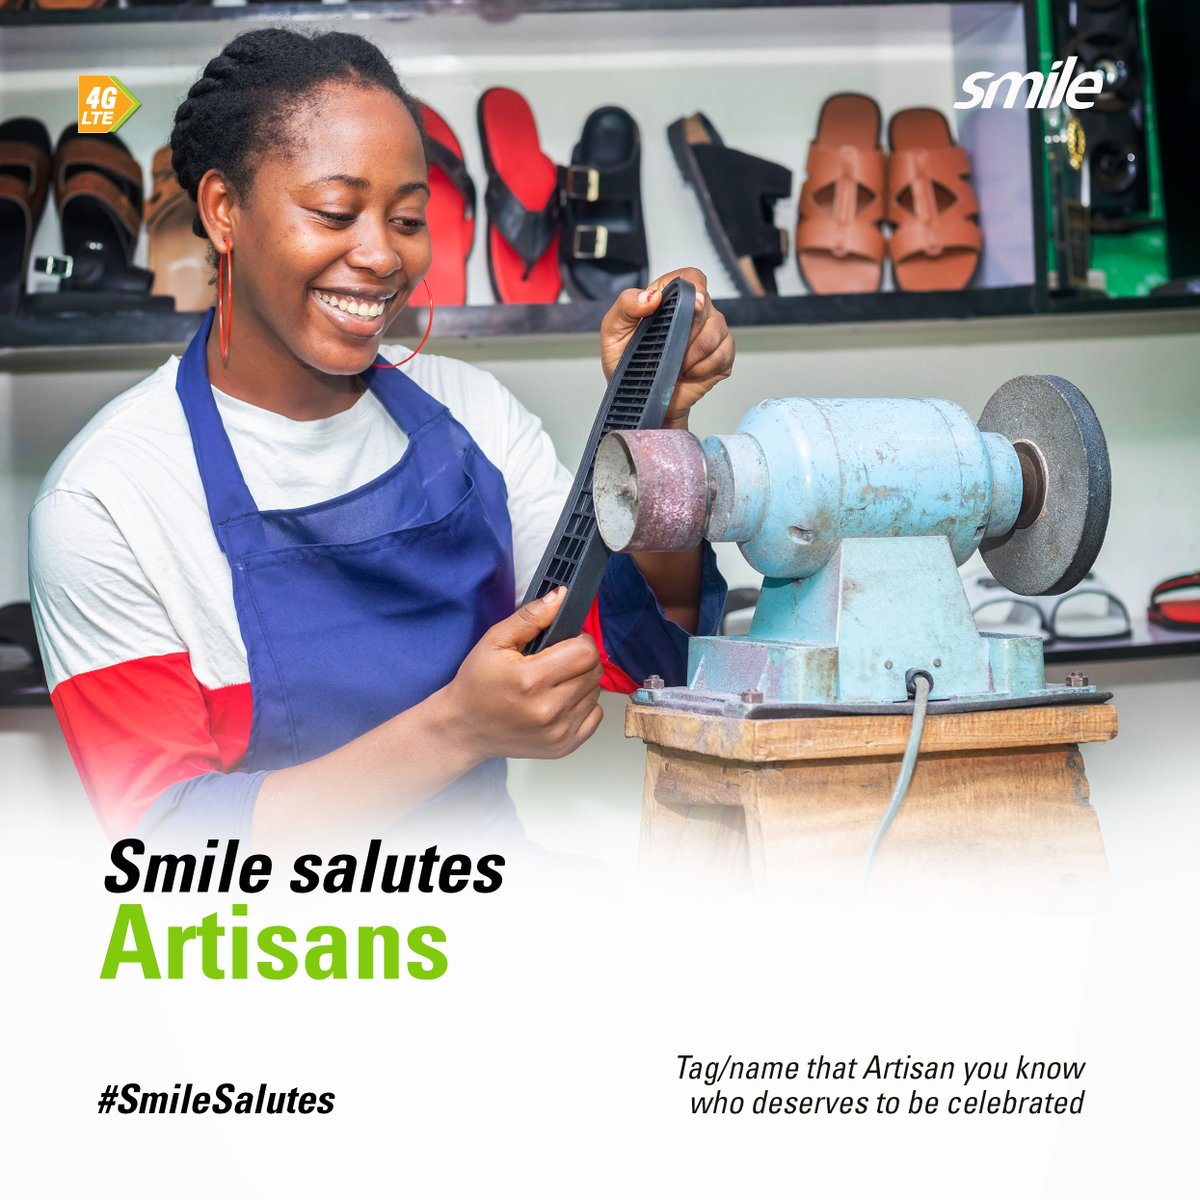 Smile Salutes the tenacity of Artisans today

Tag any hard working blue-collar worker that you know who deserves to be celebrated.

Highest nominations by reactions wins a special gift. Smile

#Smile #SmileSalutes #workersday #celebrate